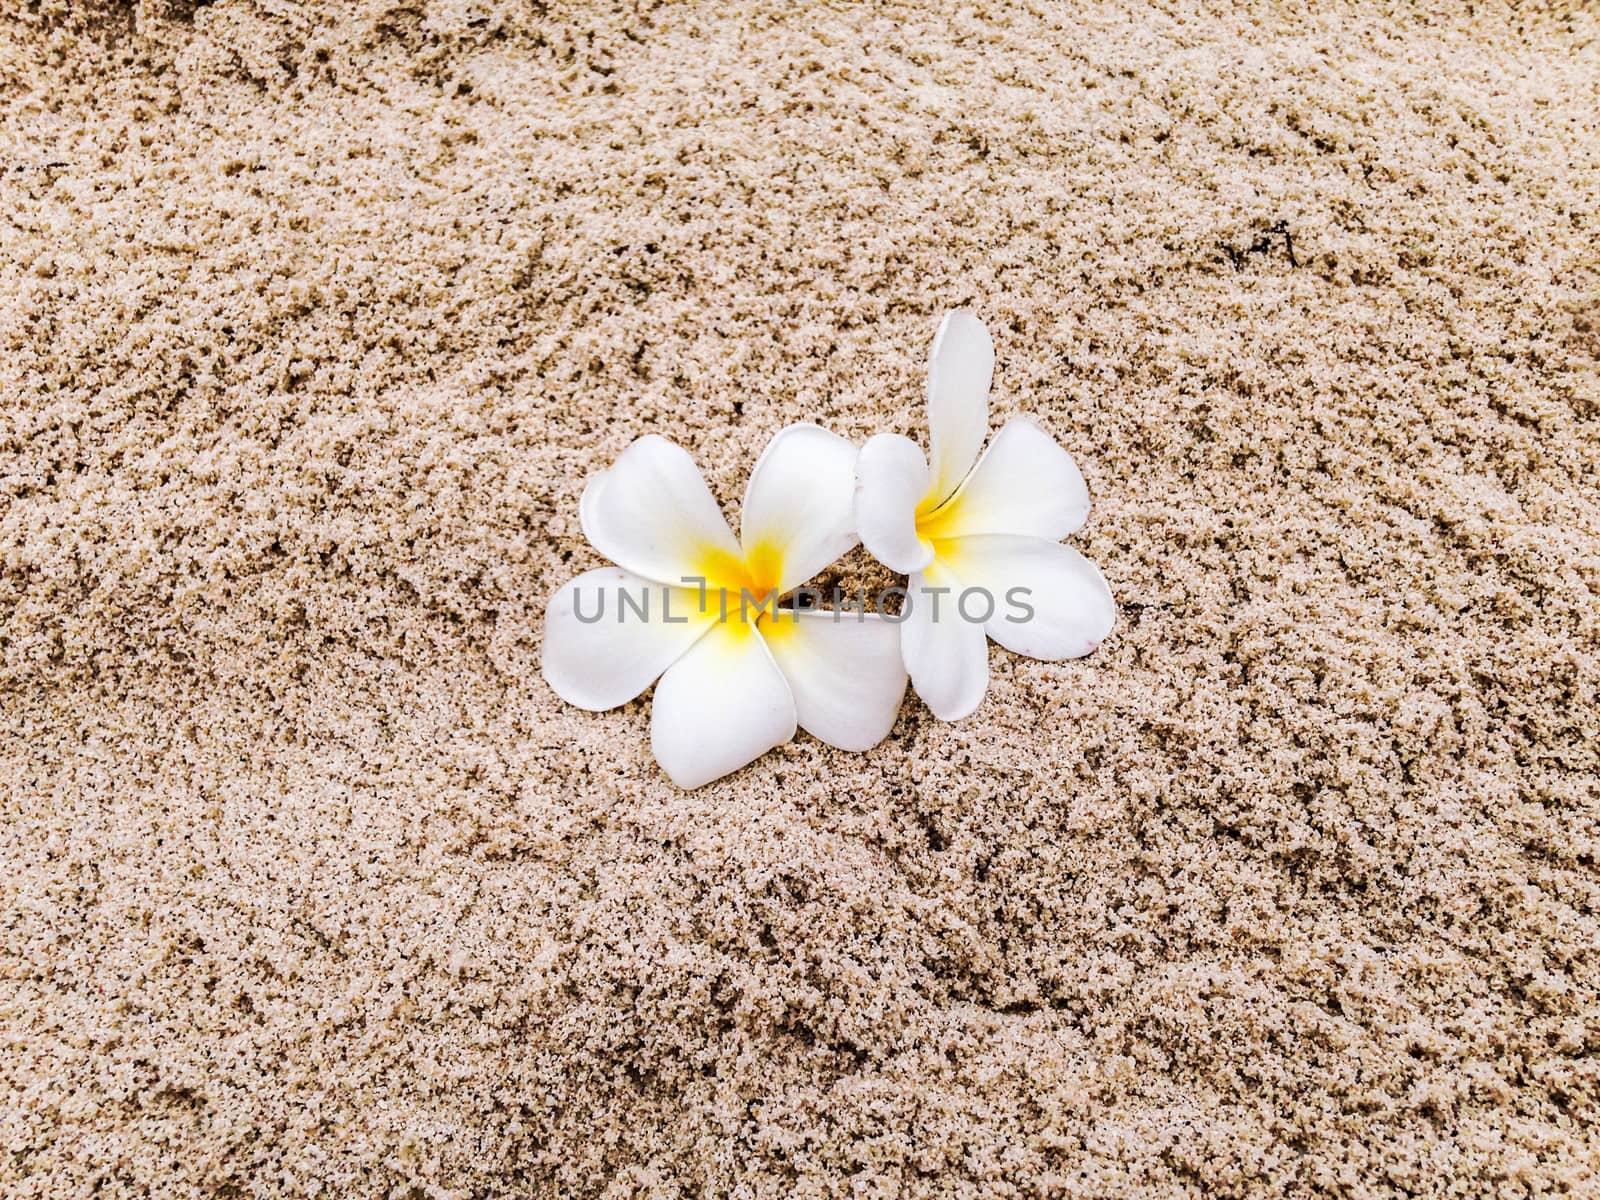 Tiaré flowers on the sand by Lordignolo